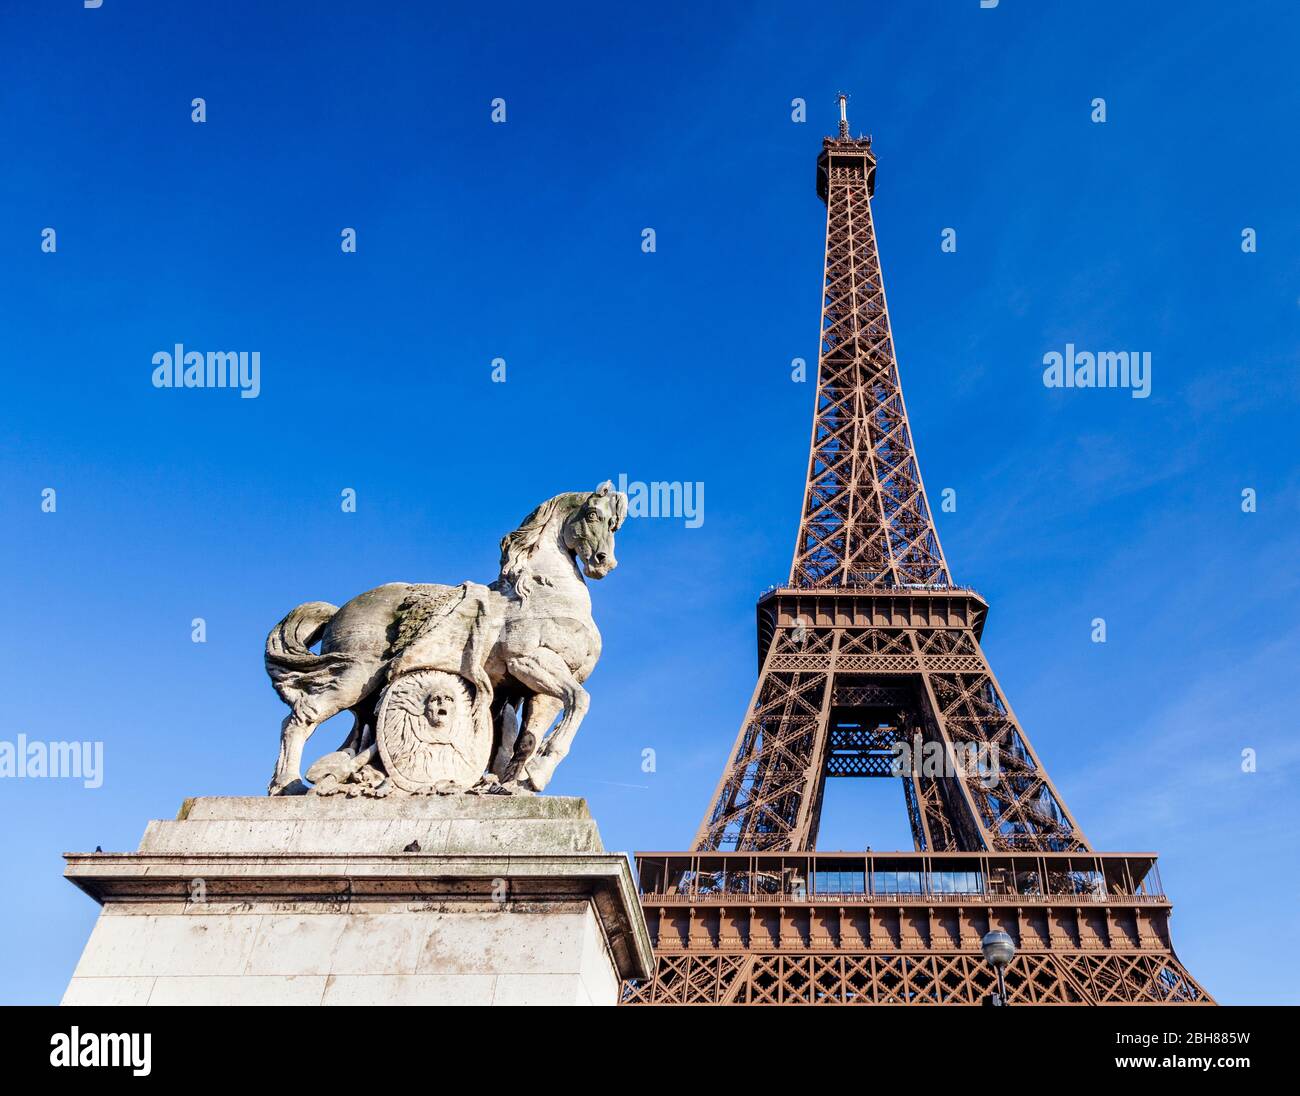 The Gallic warrior sculpture by Antoine-Augustin Préault on the Pont d'Iéna with the Eiffel Tower in the background, Paris Stock Photo